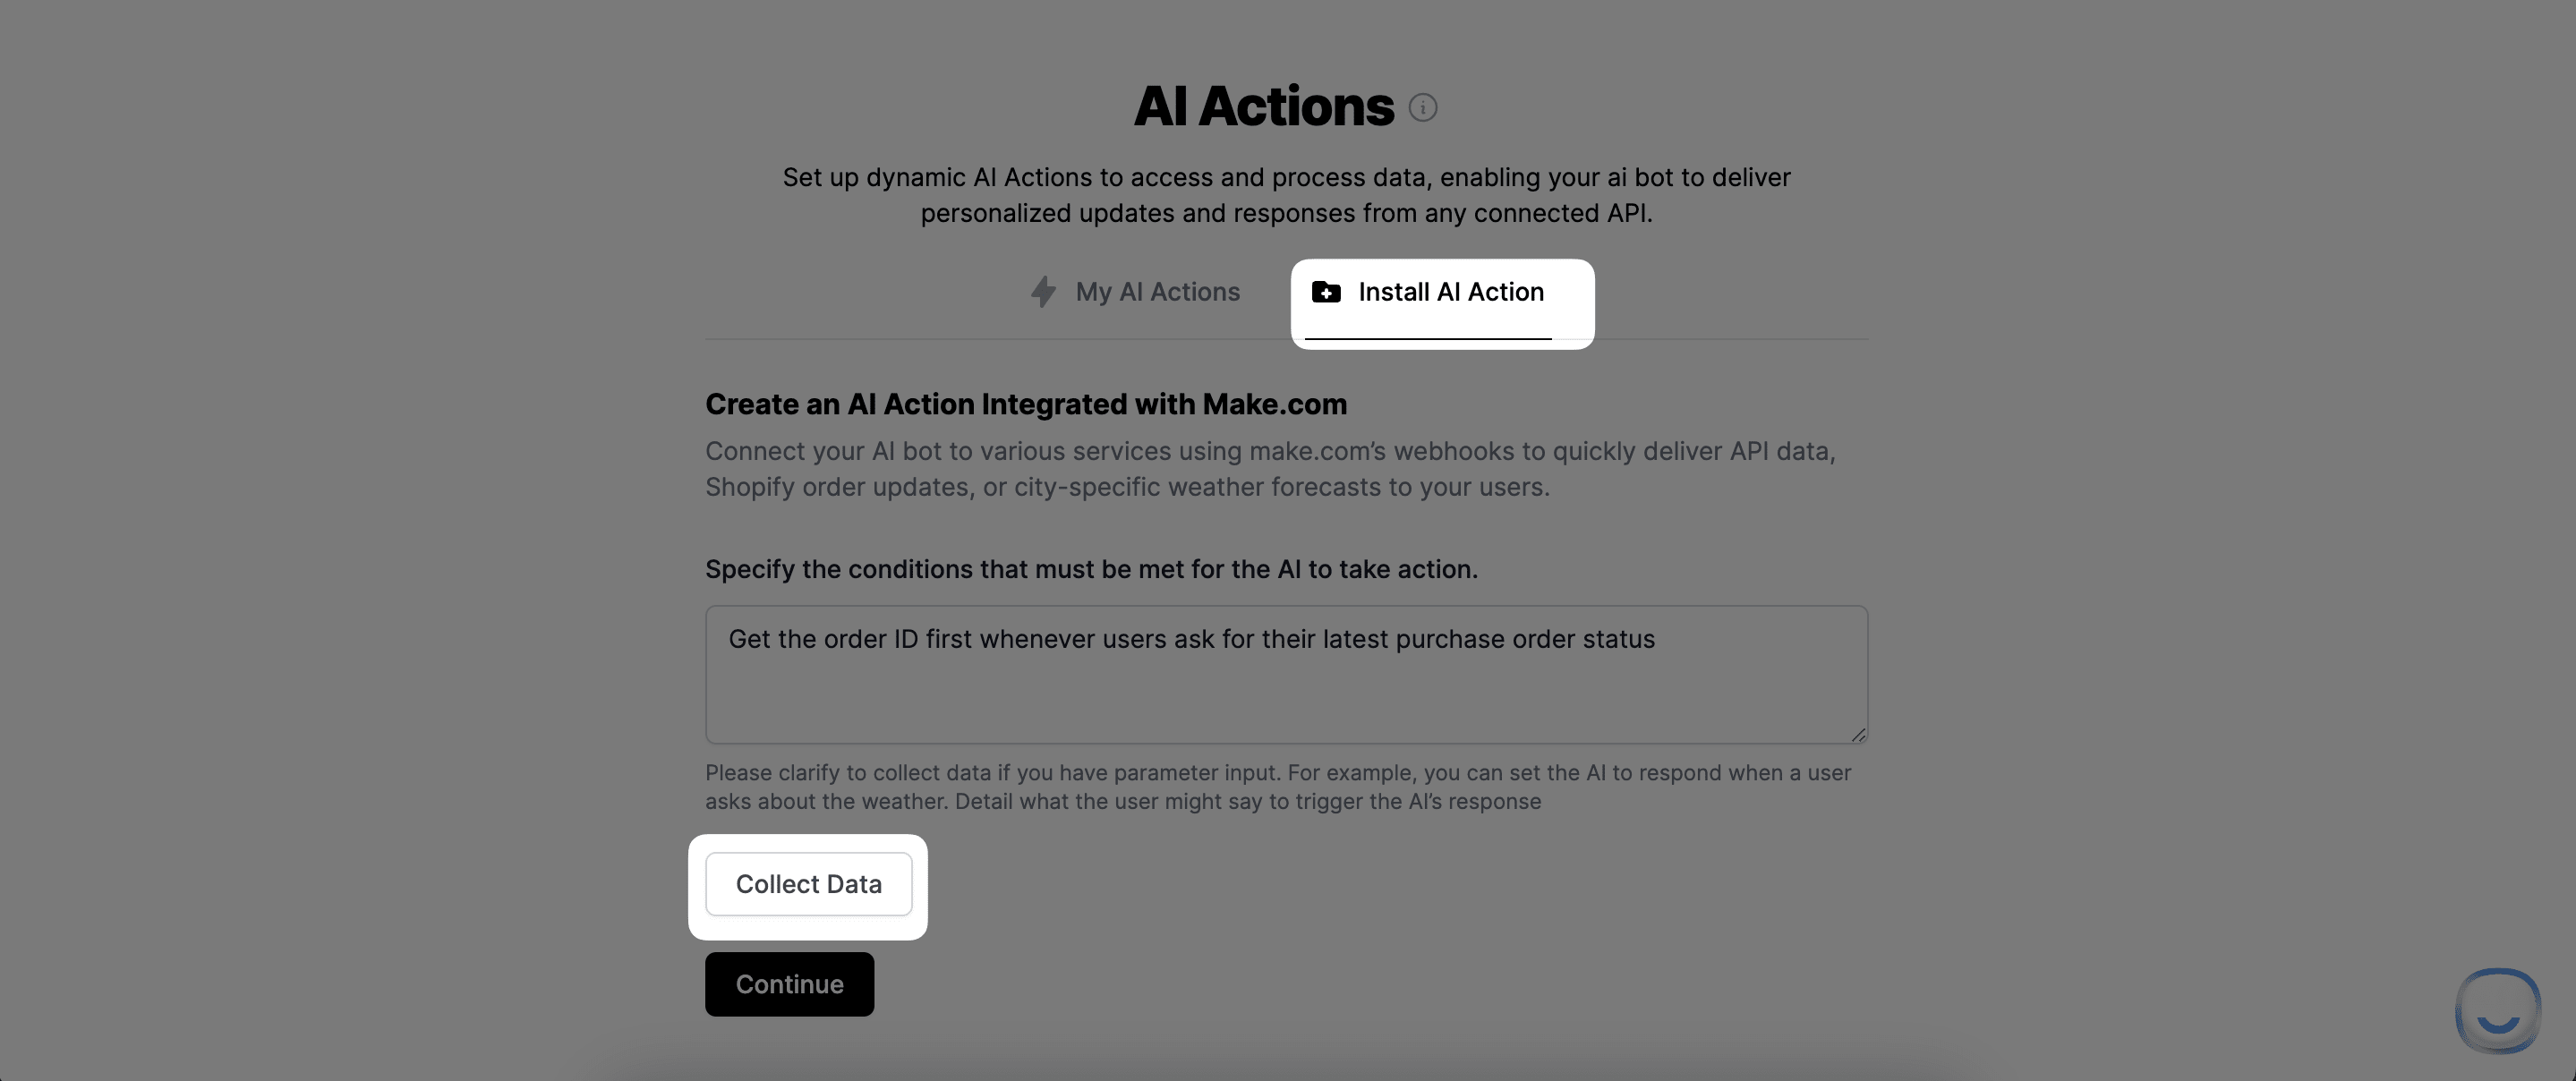 Clicking Collect Data button in Install AI Action section